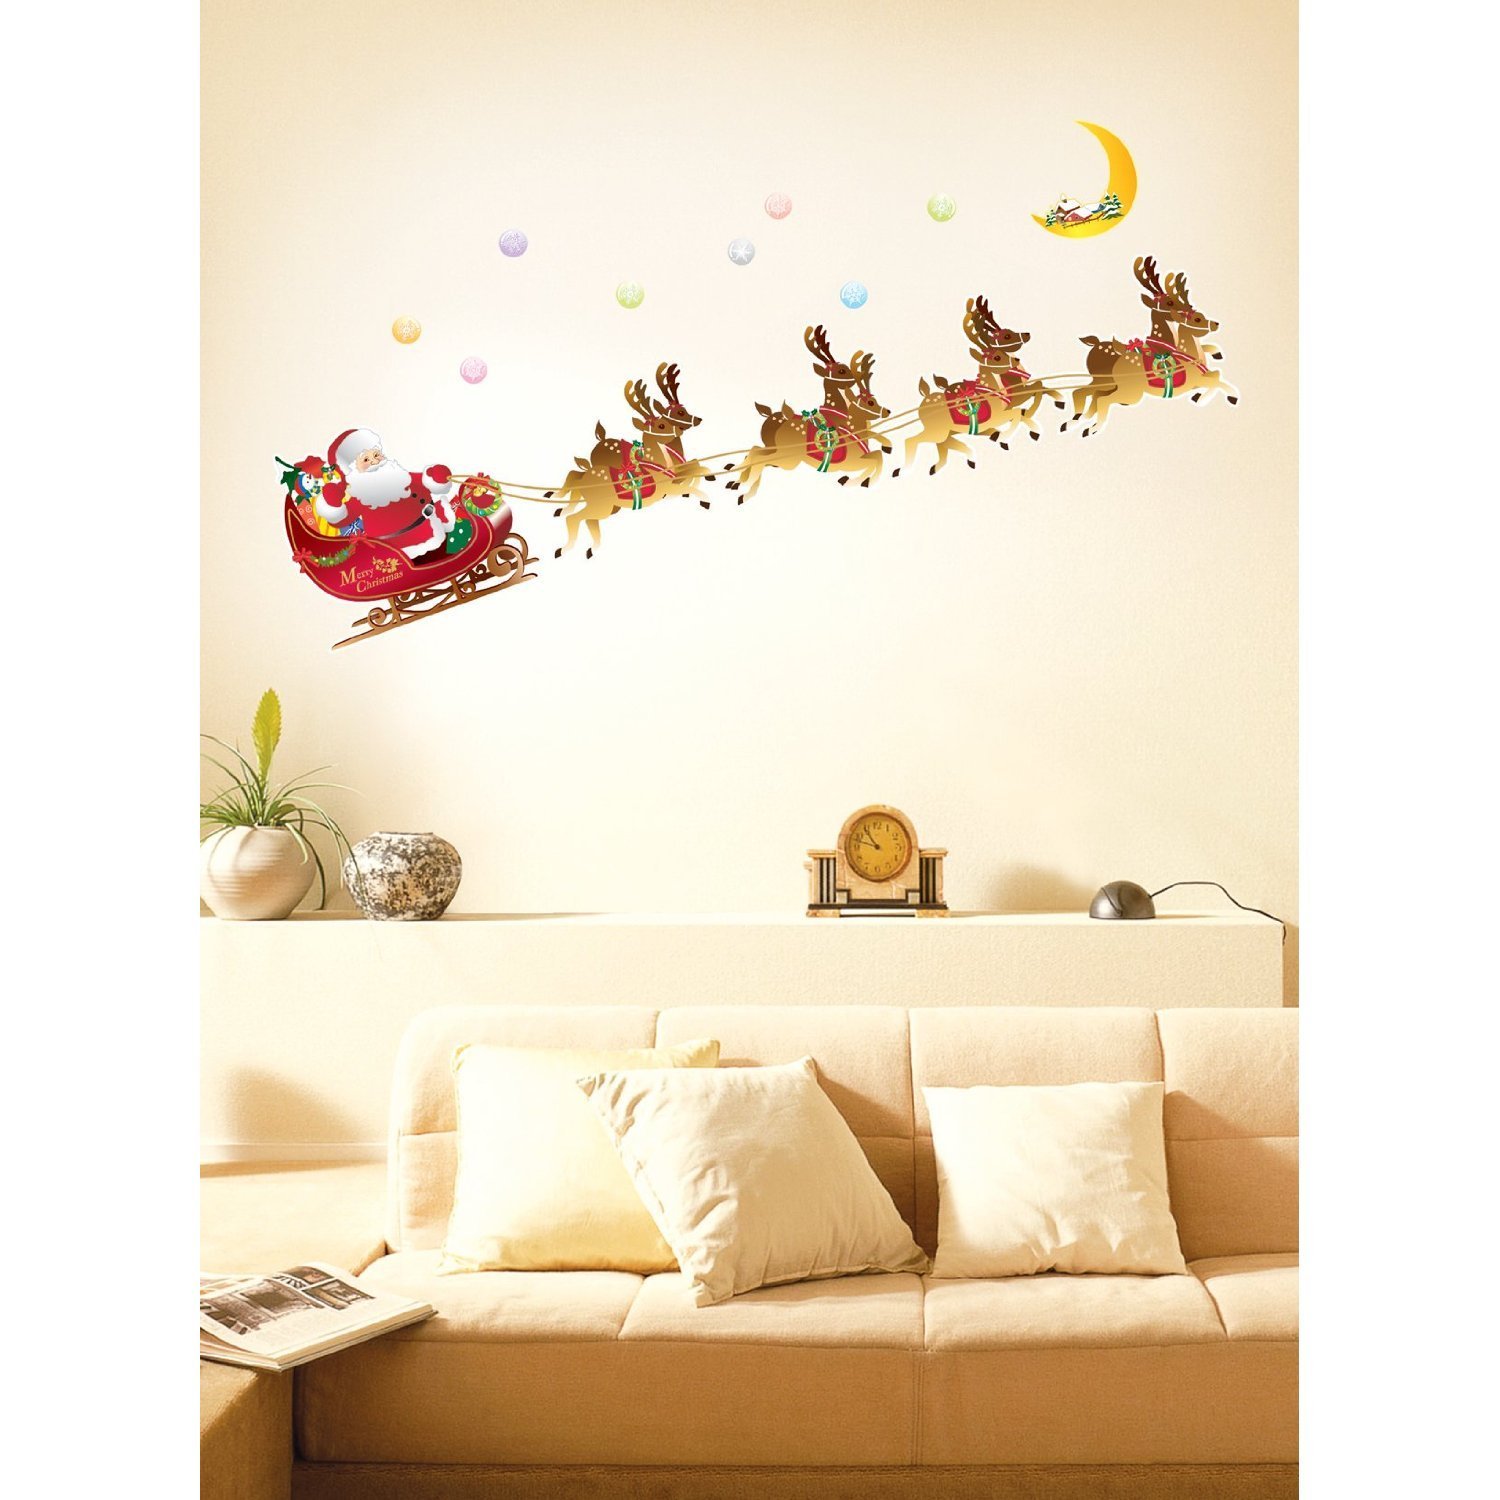 christmas santa decorations reindeer sleigh decals decoration homemade decor diy reg stickers decorating simple magment walls special mojosavings holiday decal